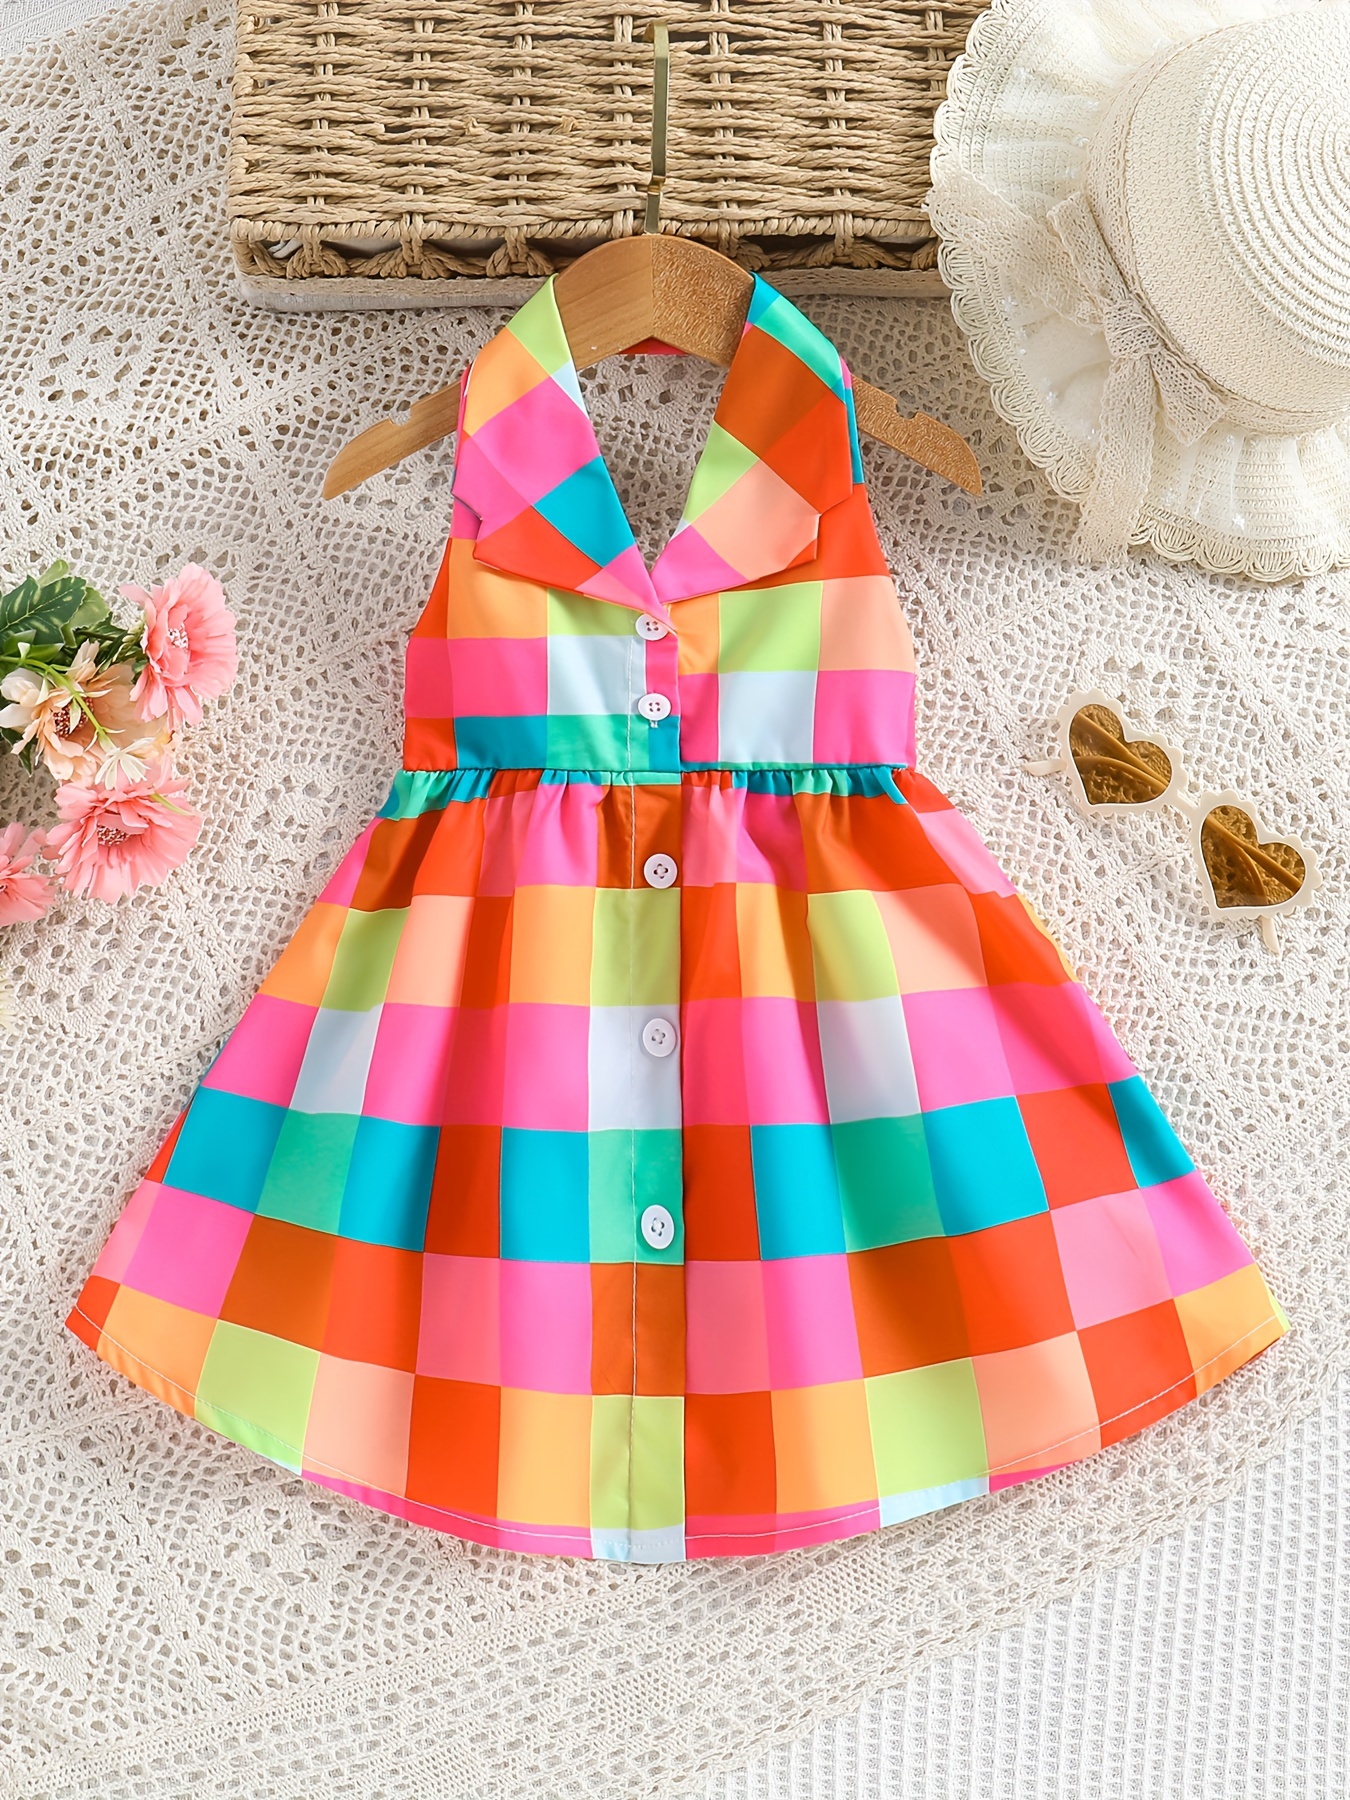 skpabo Toddler Baby Girl Summer Dress Sleeveless Plaid Print Backless Lace  Dress Cotton Casual Dresses 